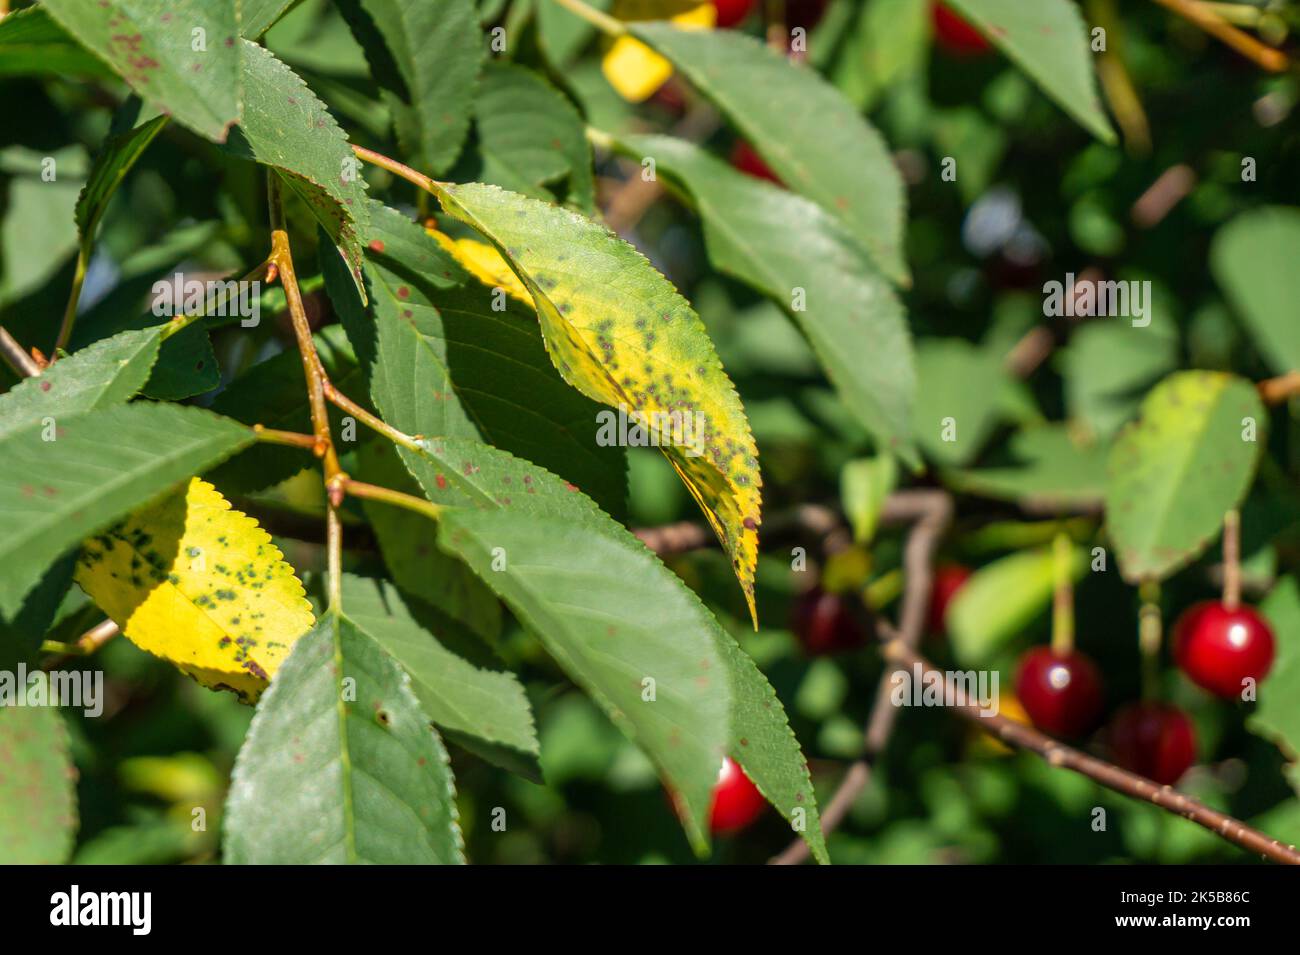 Cherry leaf spot disease or Coccomycosis caused by Blumeriella jaapii fungus. Yellow cherry leaves with brown spots. Stock Photo